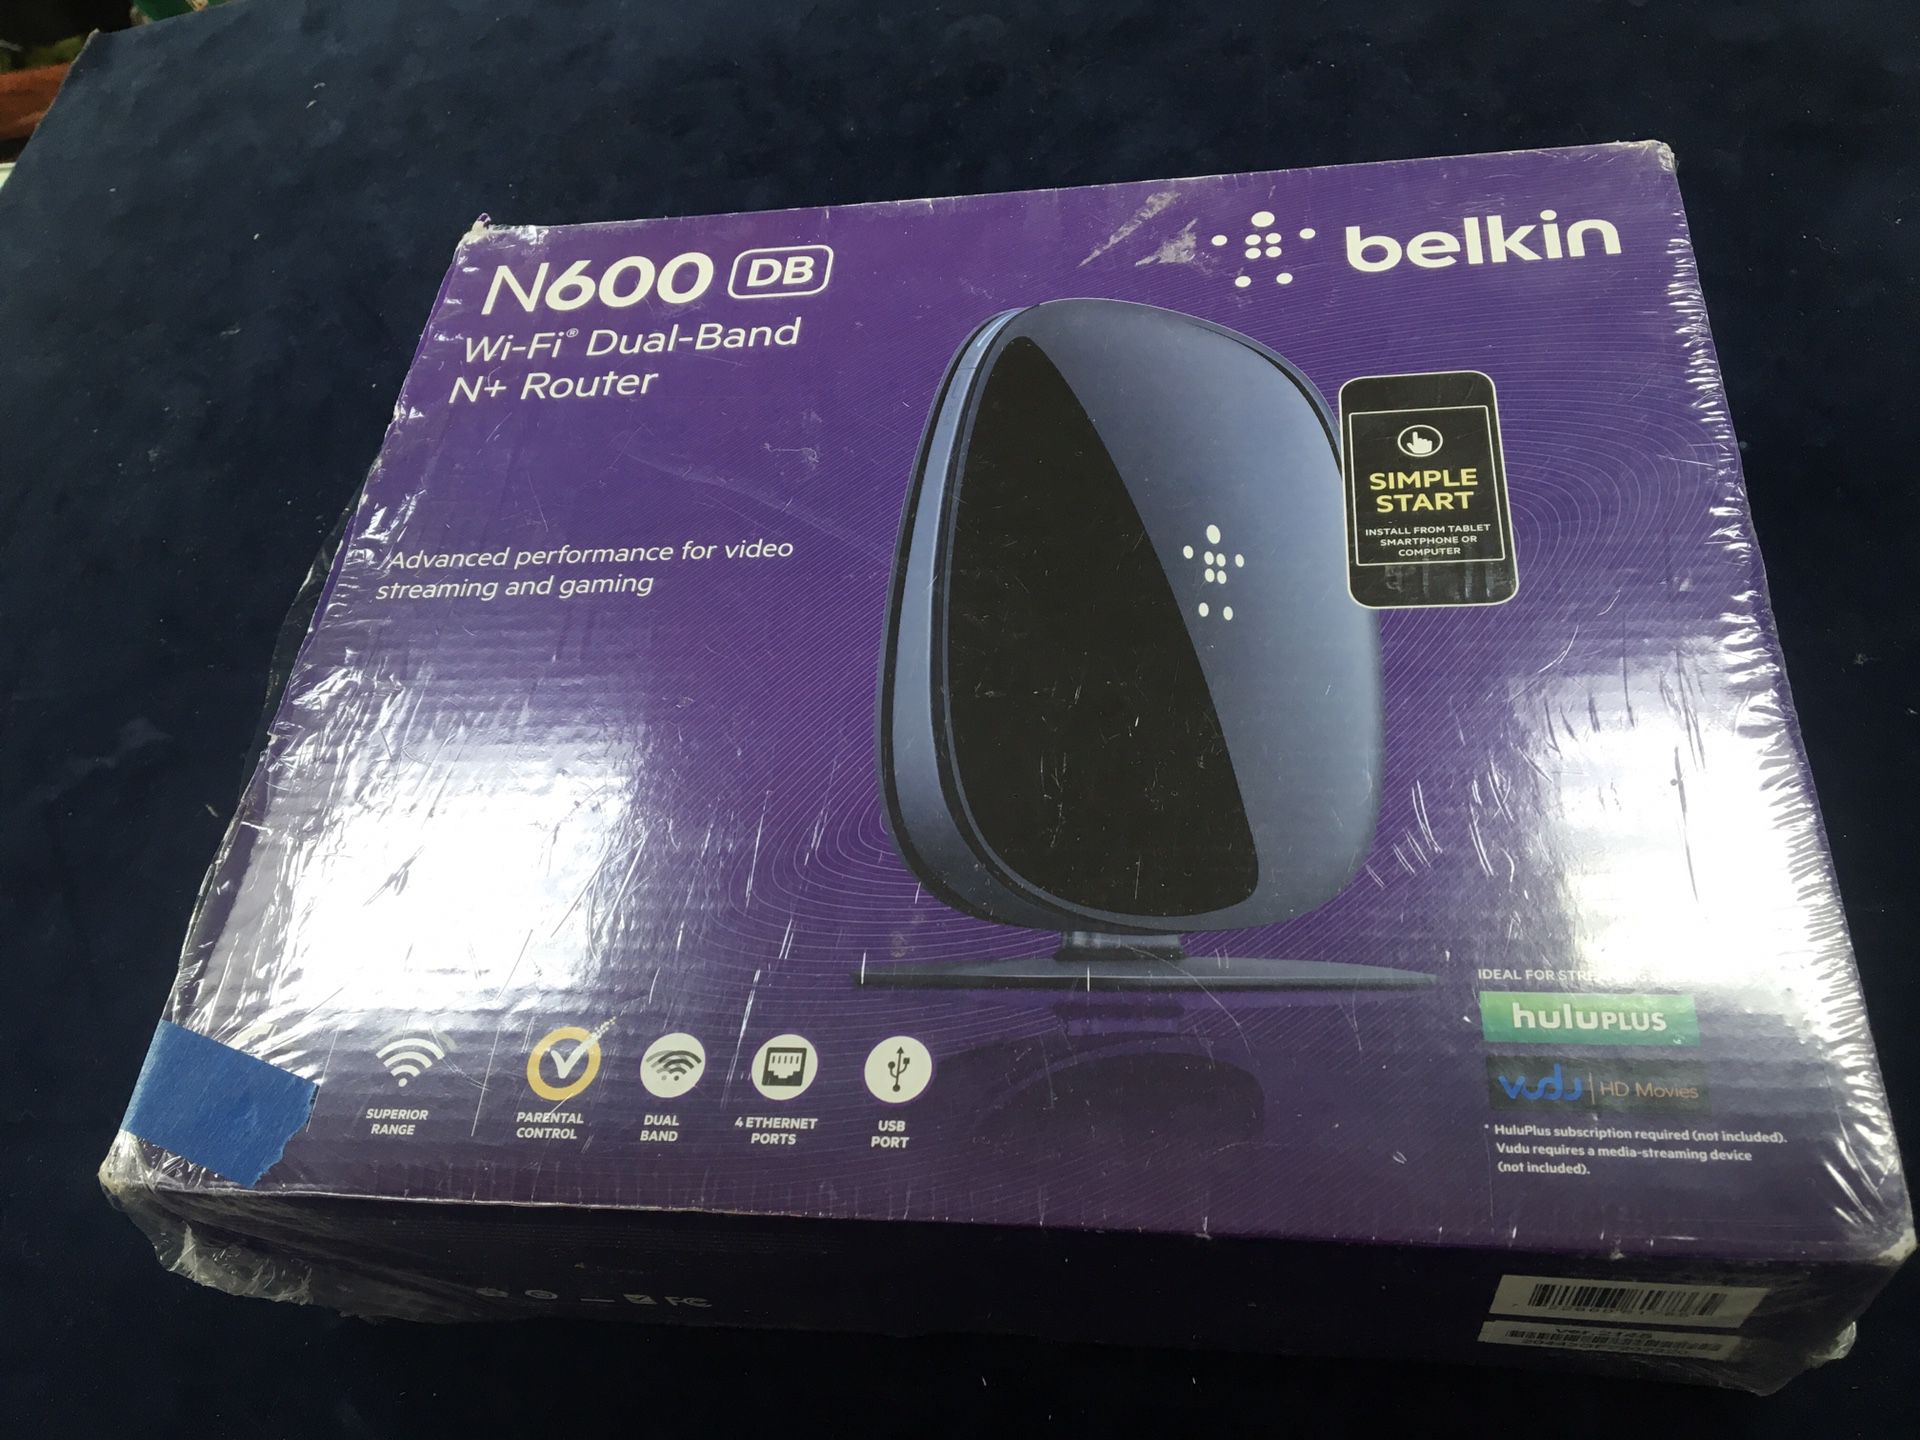 Belkin N600 DB WiFi Dual-Band N+ Router - Perfect for online streaming or gaming